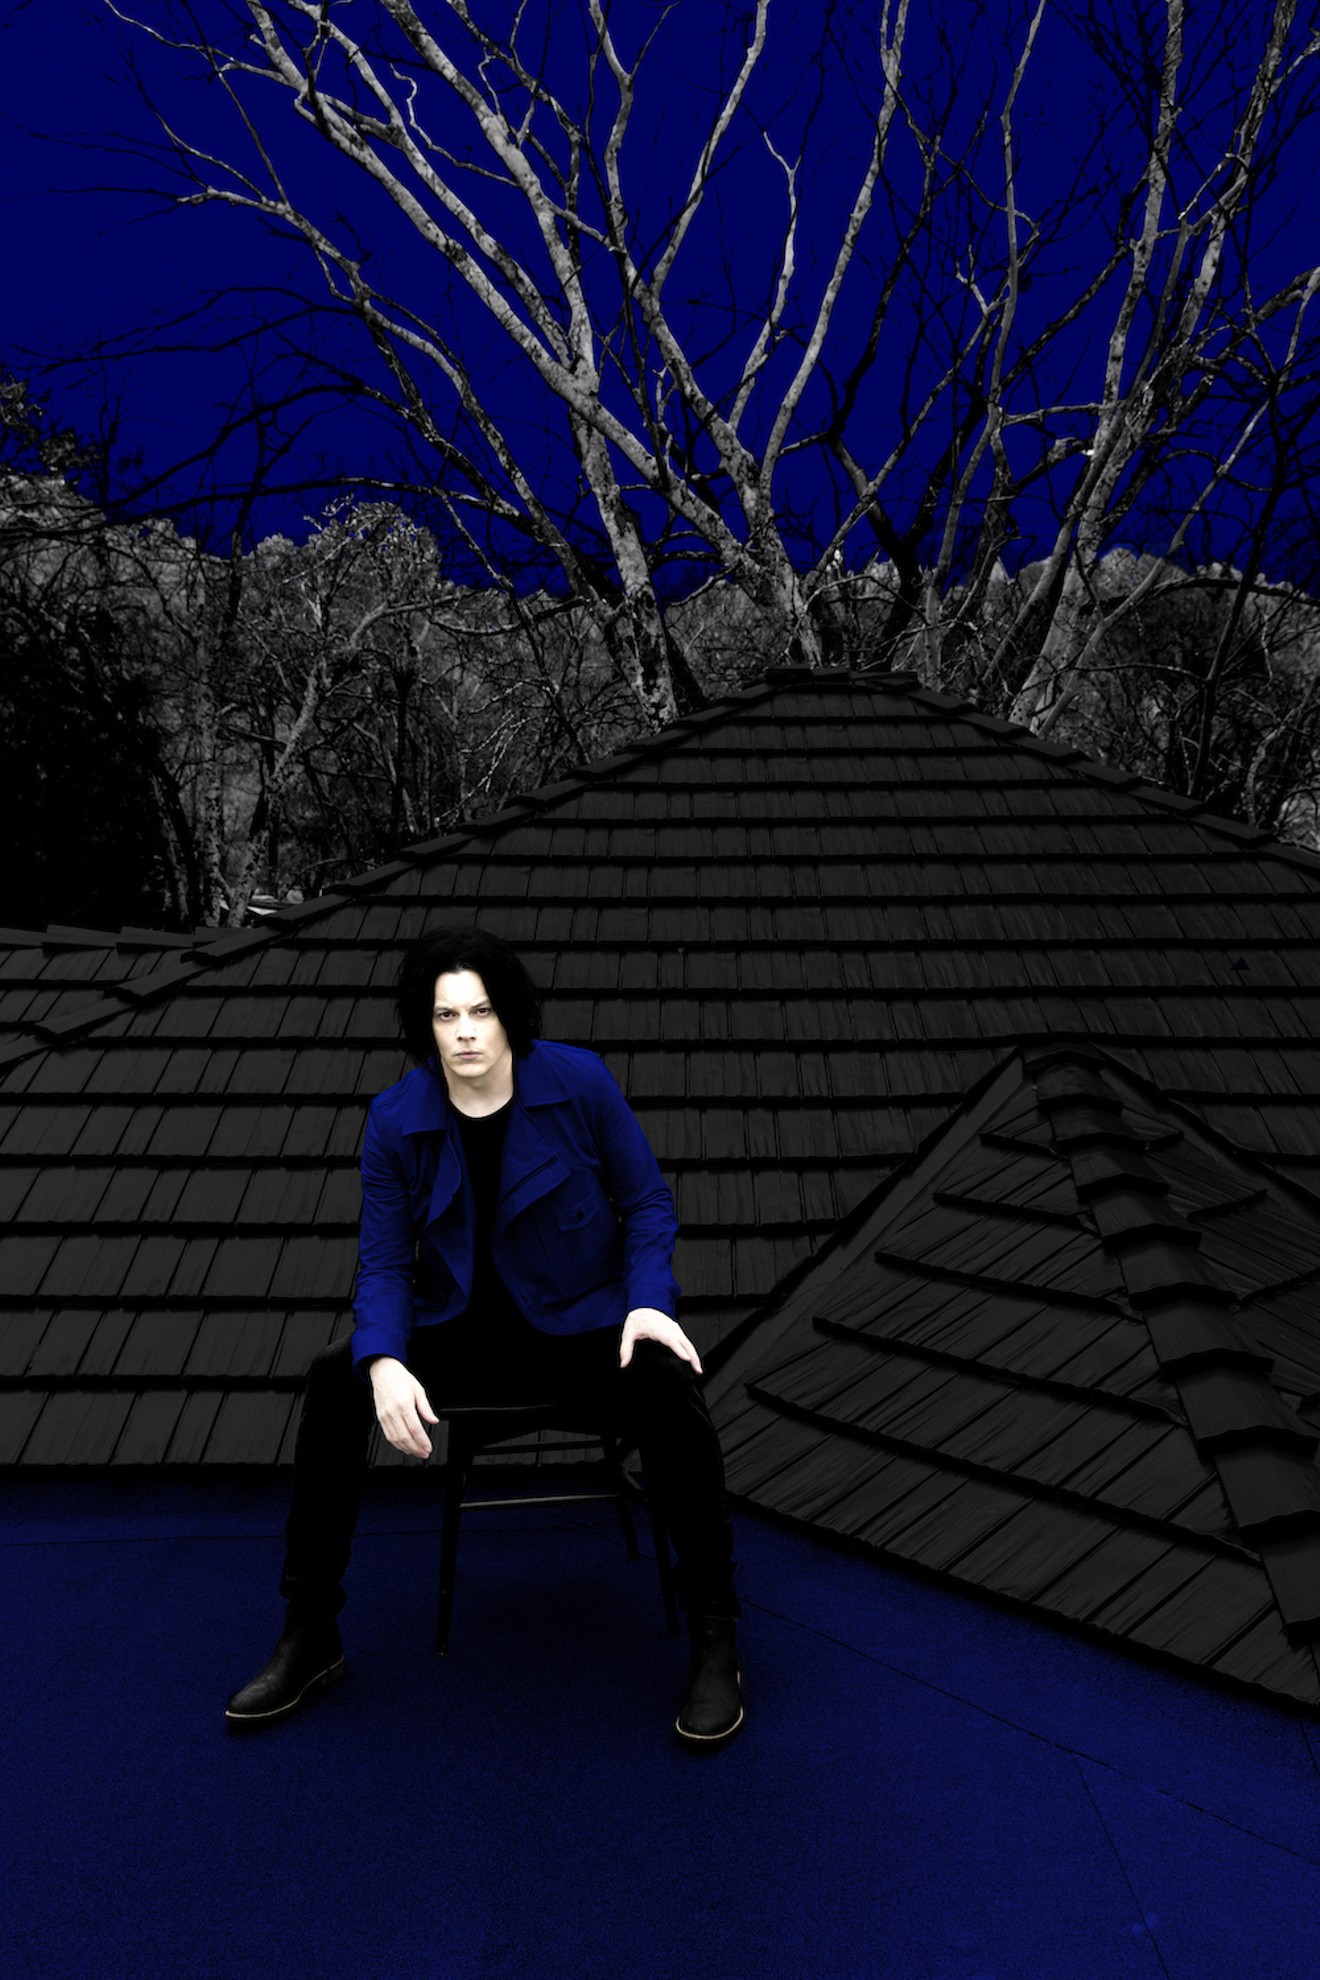 So, 2018's Jack White may be a little different, but it's still Jack White.